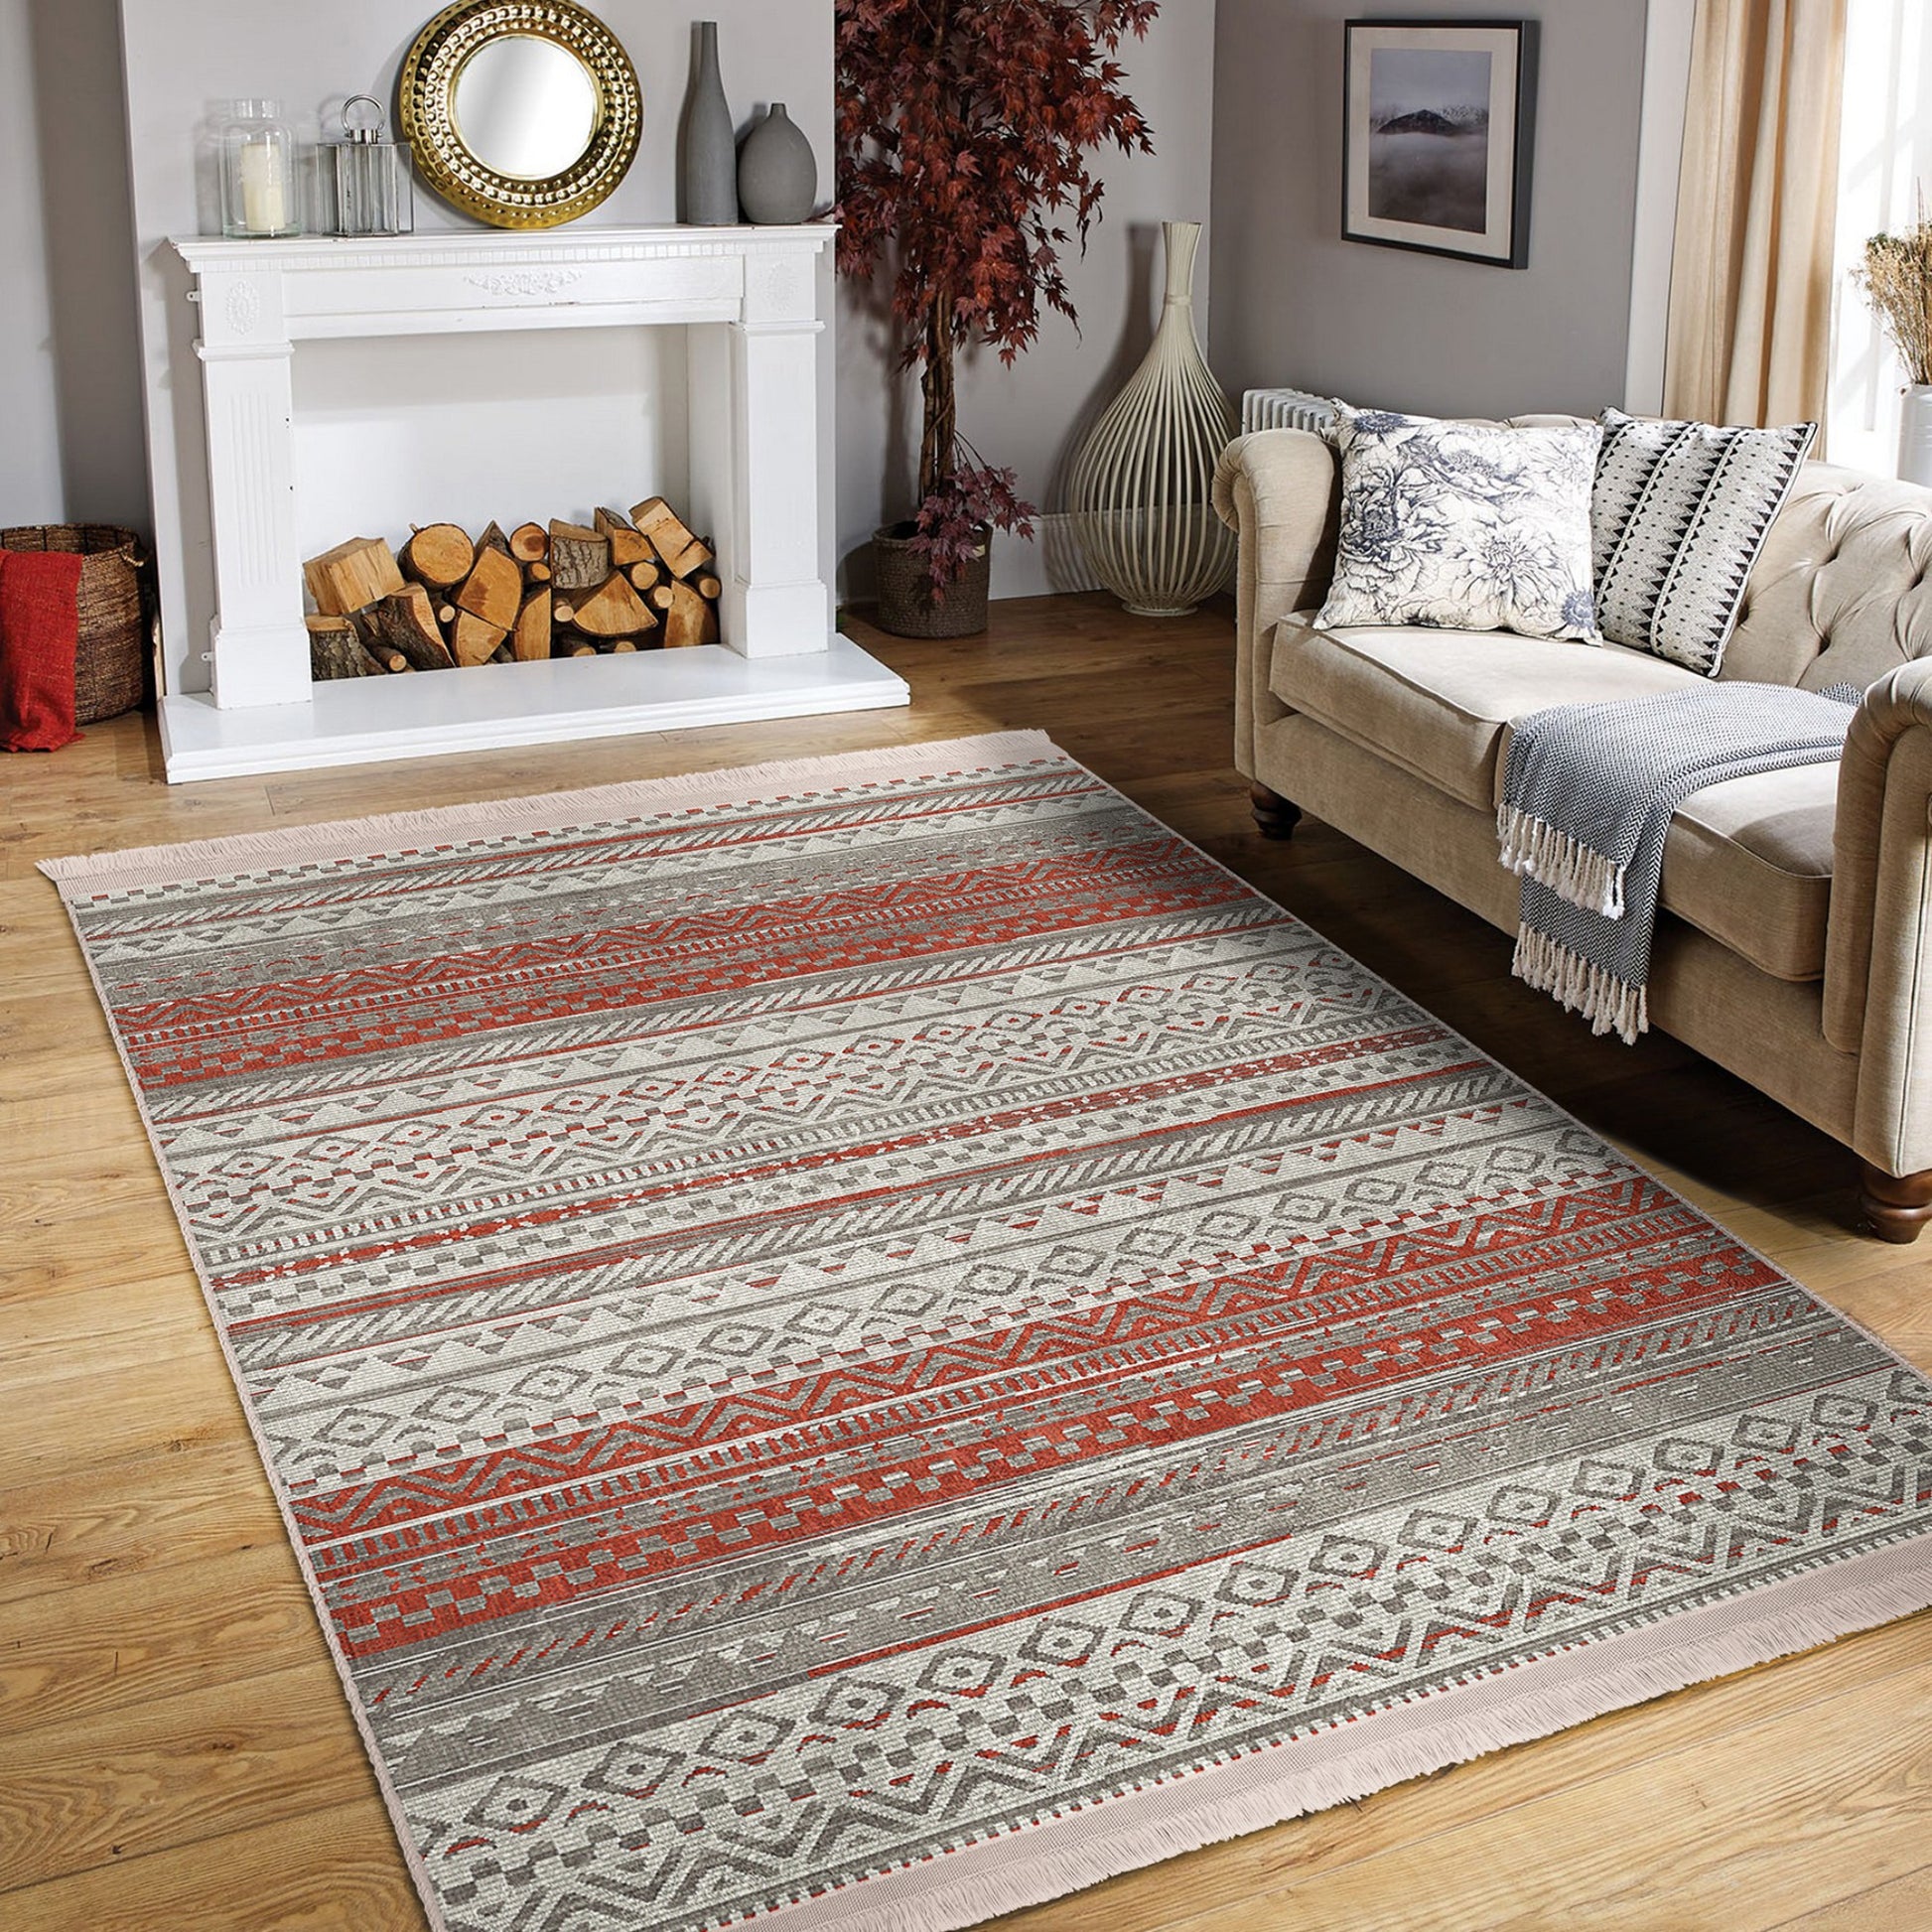 Decorative Area Rug with Rich Cultural Heritage Patterns